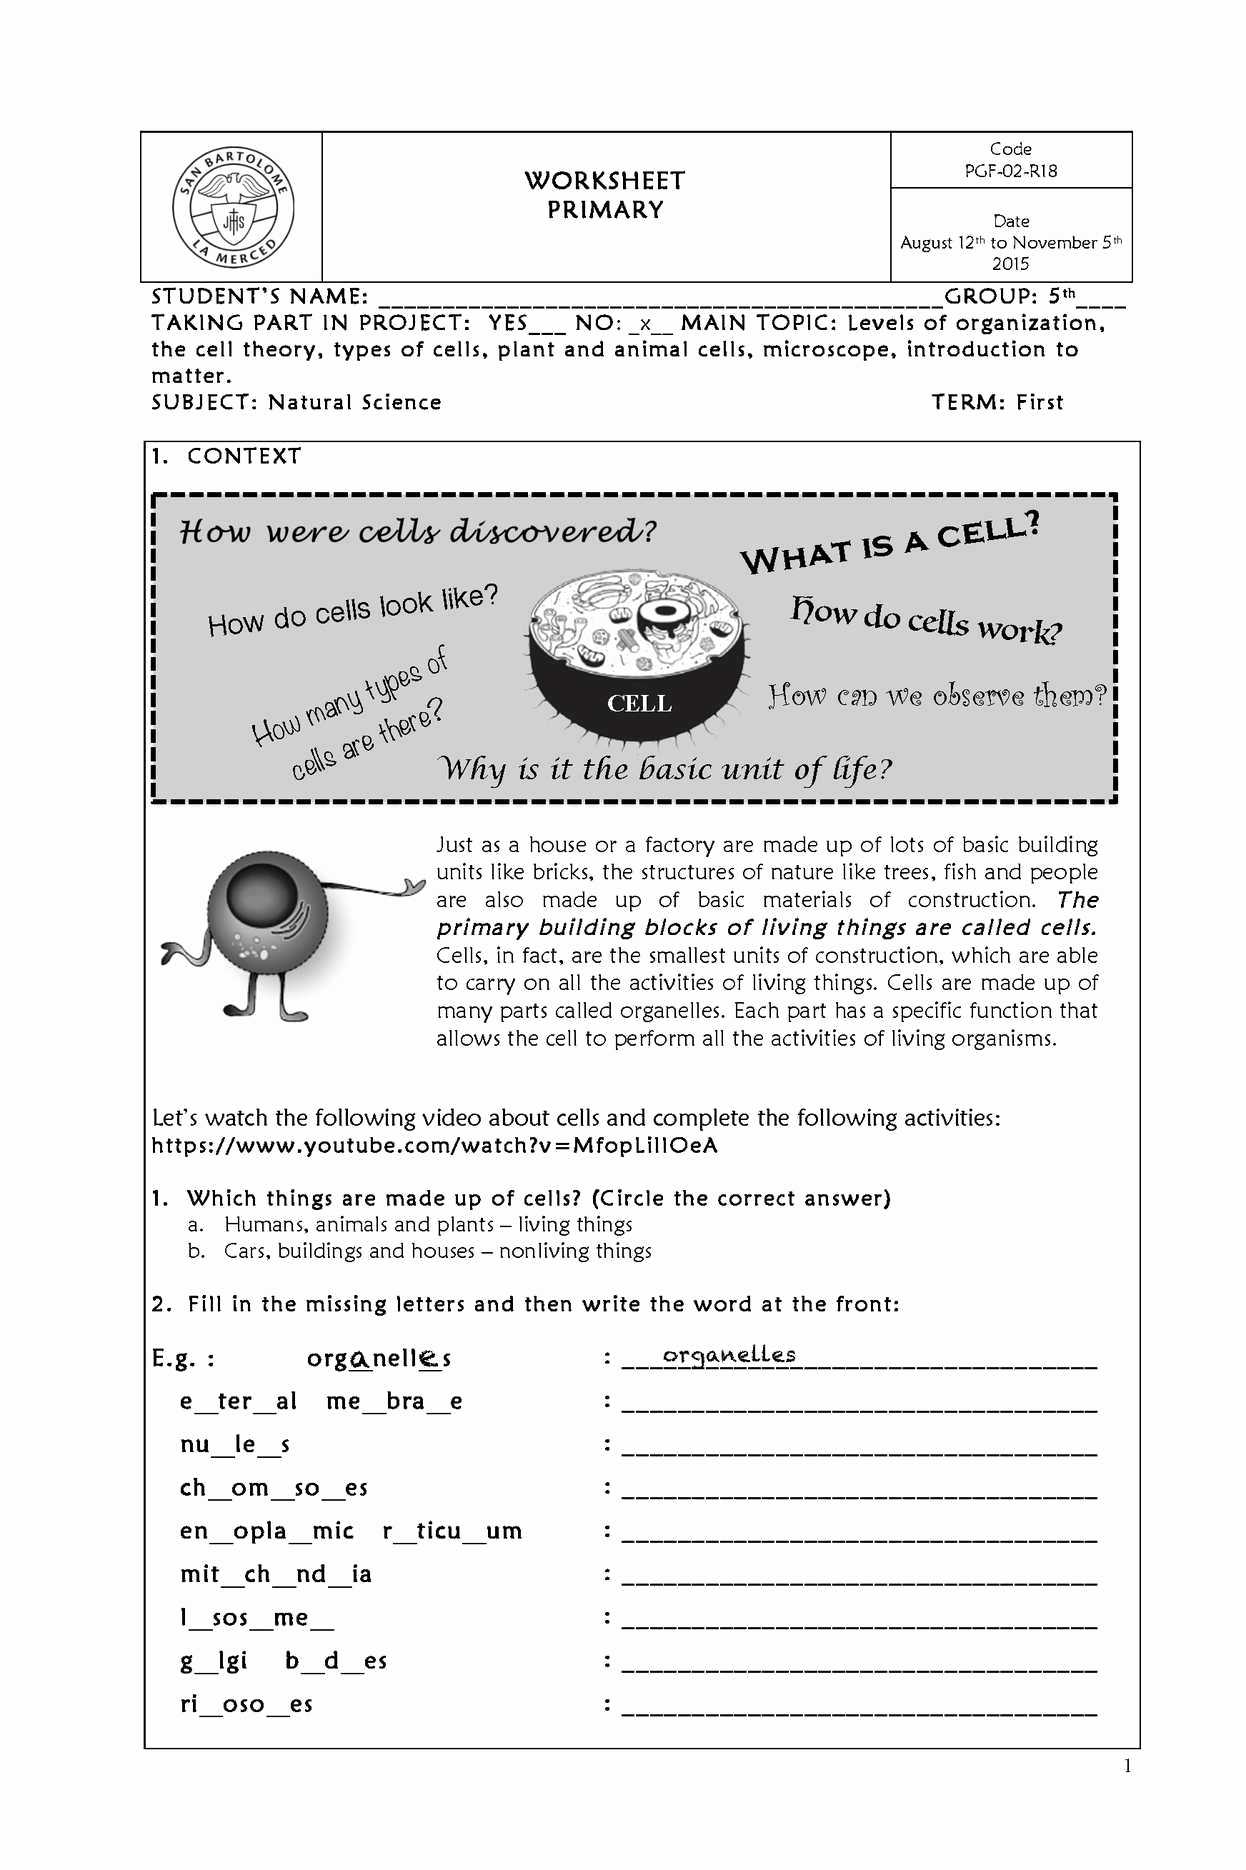 Cell Parts and Functions Worksheet Answers Along with Parts A Microscope Worksheet New Calaméo First Term Worksheet